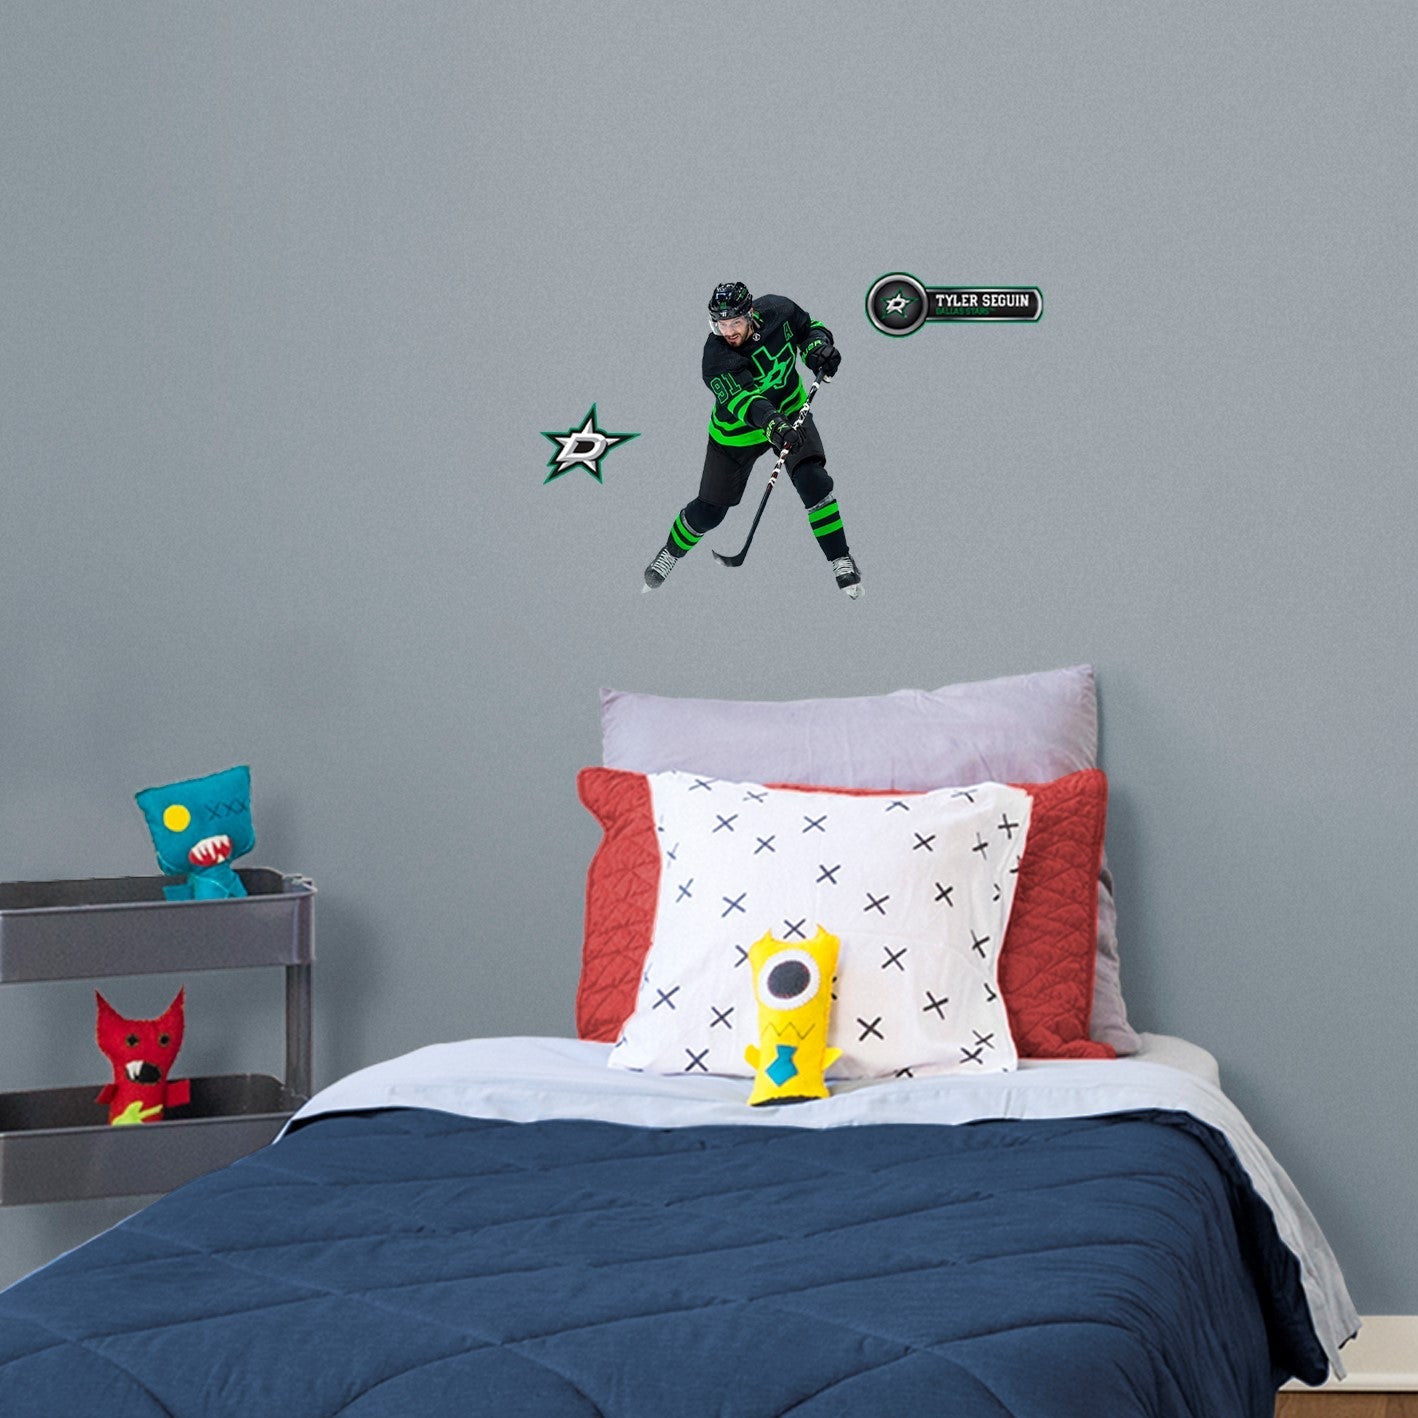 Dallas Stars: Tyler Seguin - Officially Licensed NHL Removable Adhesive Decal